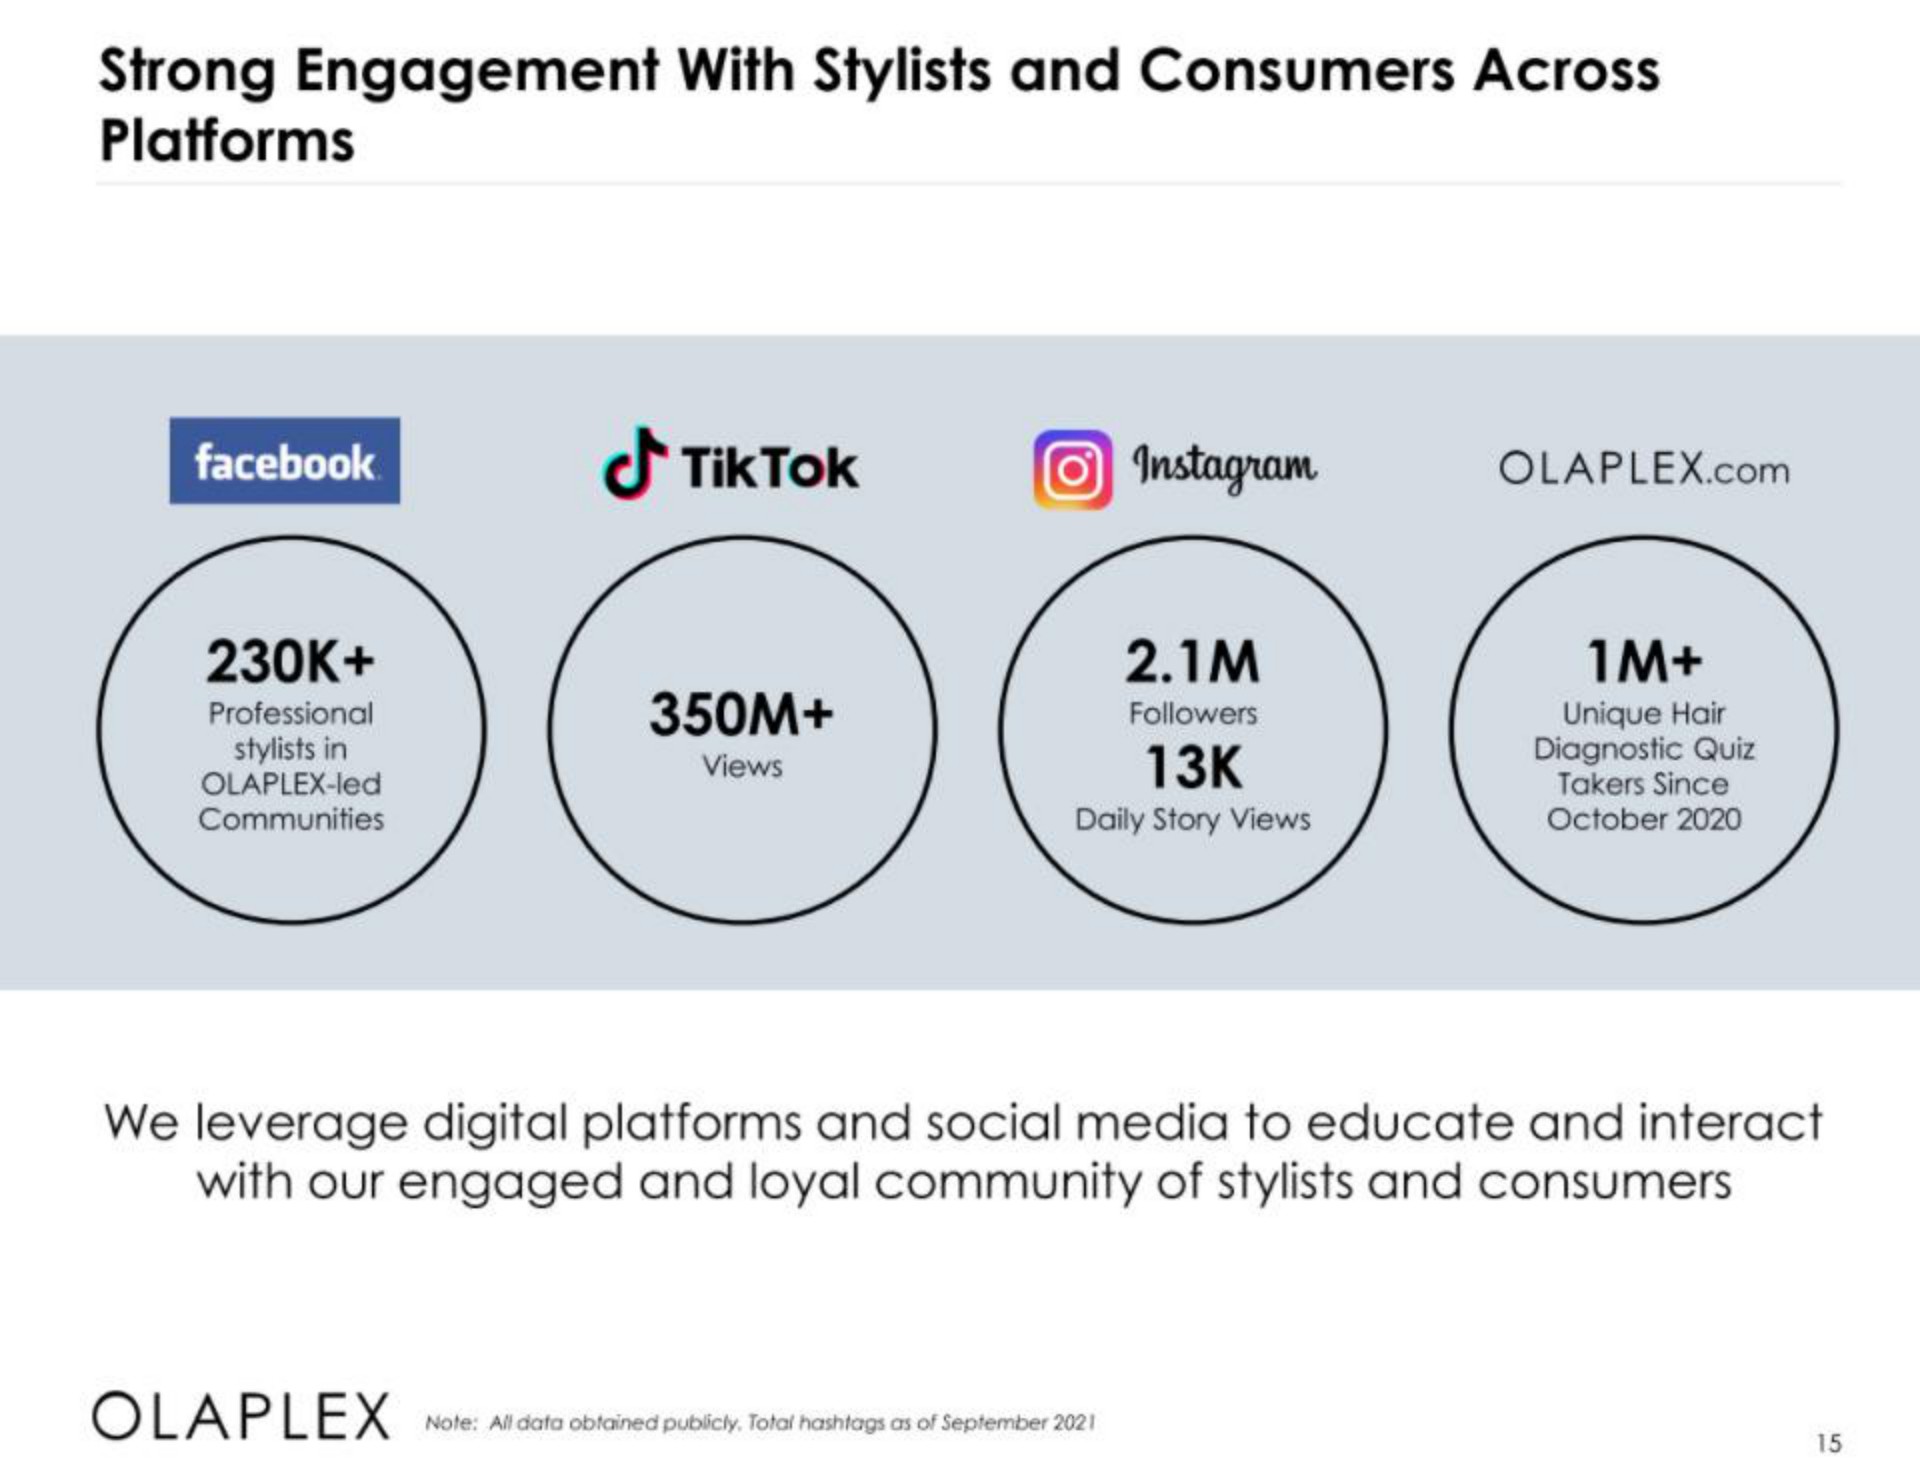 strong engagement with stylists and consumers across platforms we leverage digital platforms and social media to educate and interact with our engaged and loyal community of stylists and consumers | Olaplex